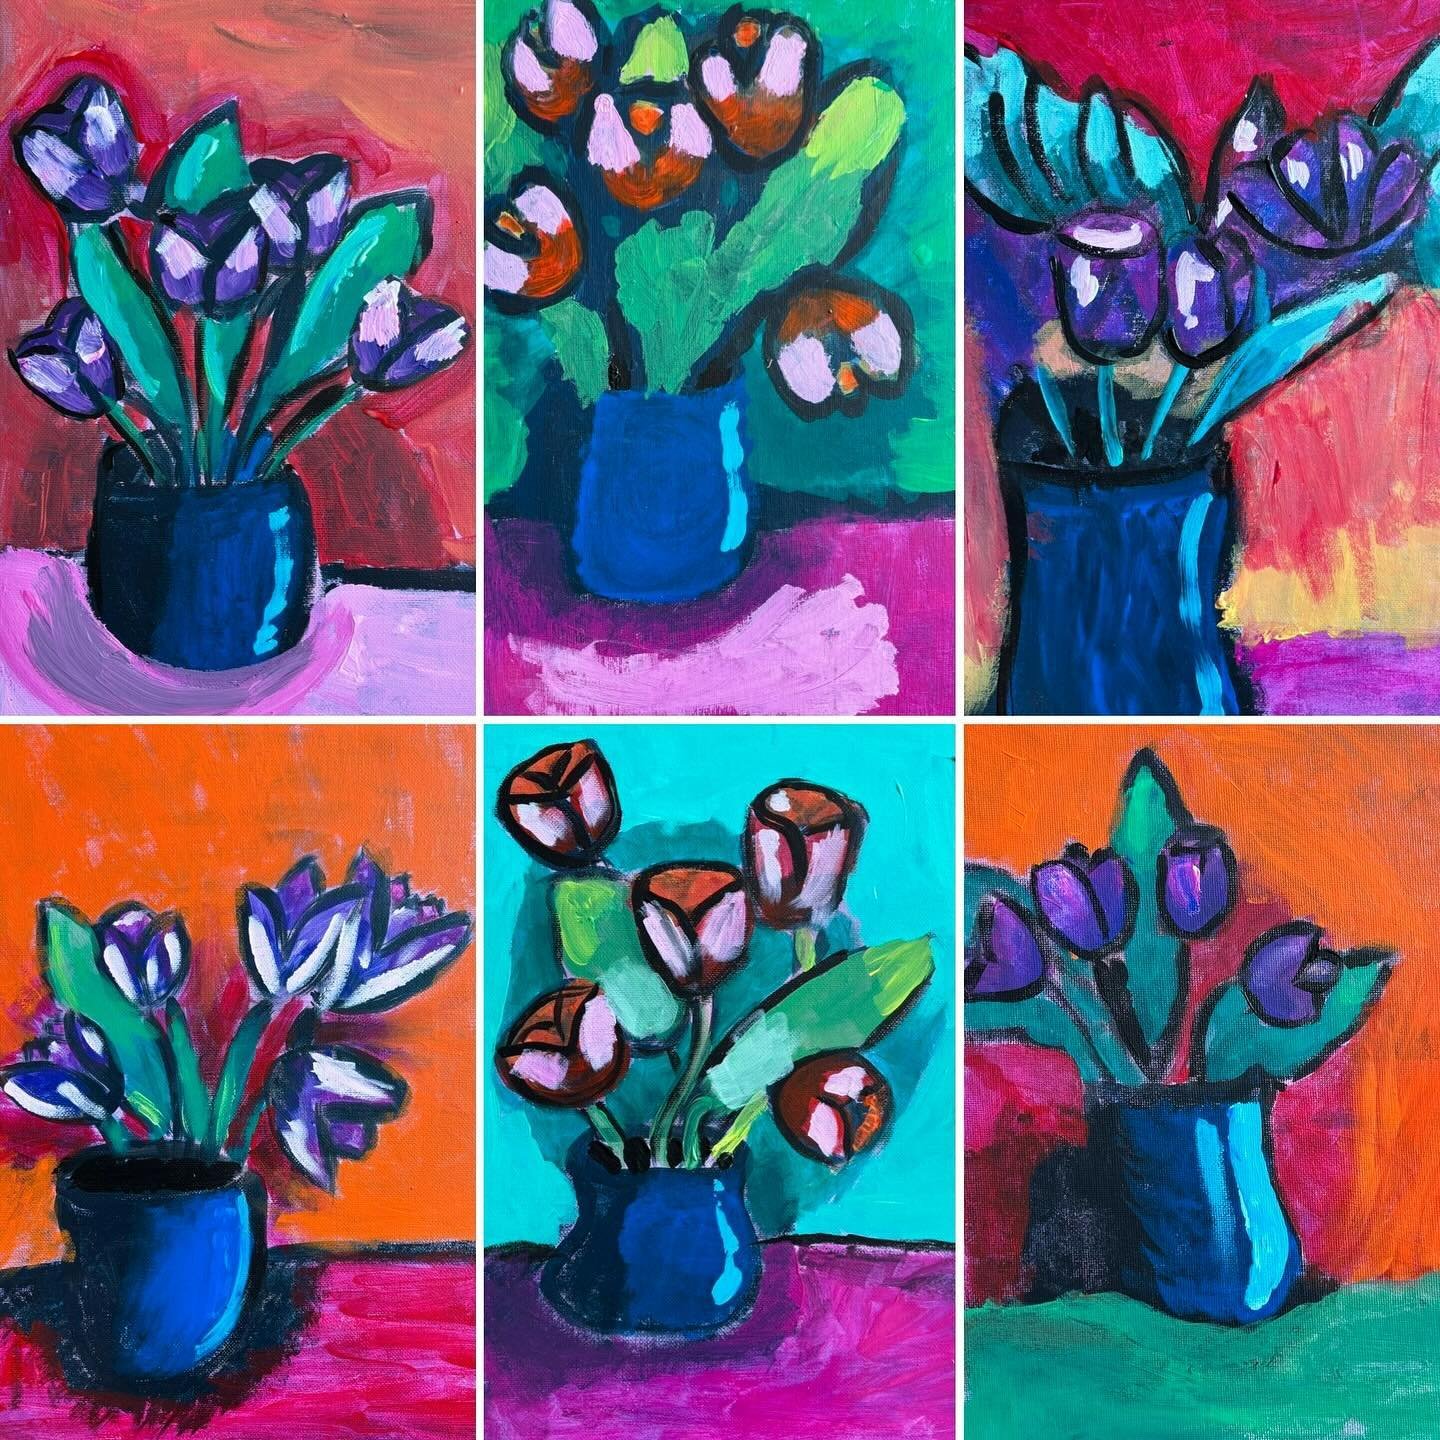 Today was our second day of #Passoverartcamp and we had fun creating and feeling #springtimevibes with a talented group of young artists from @LeoBaeckds . In the afternoon, we learned how to &ldquo;paint loosely&rdquo; with acrylic, and created thes